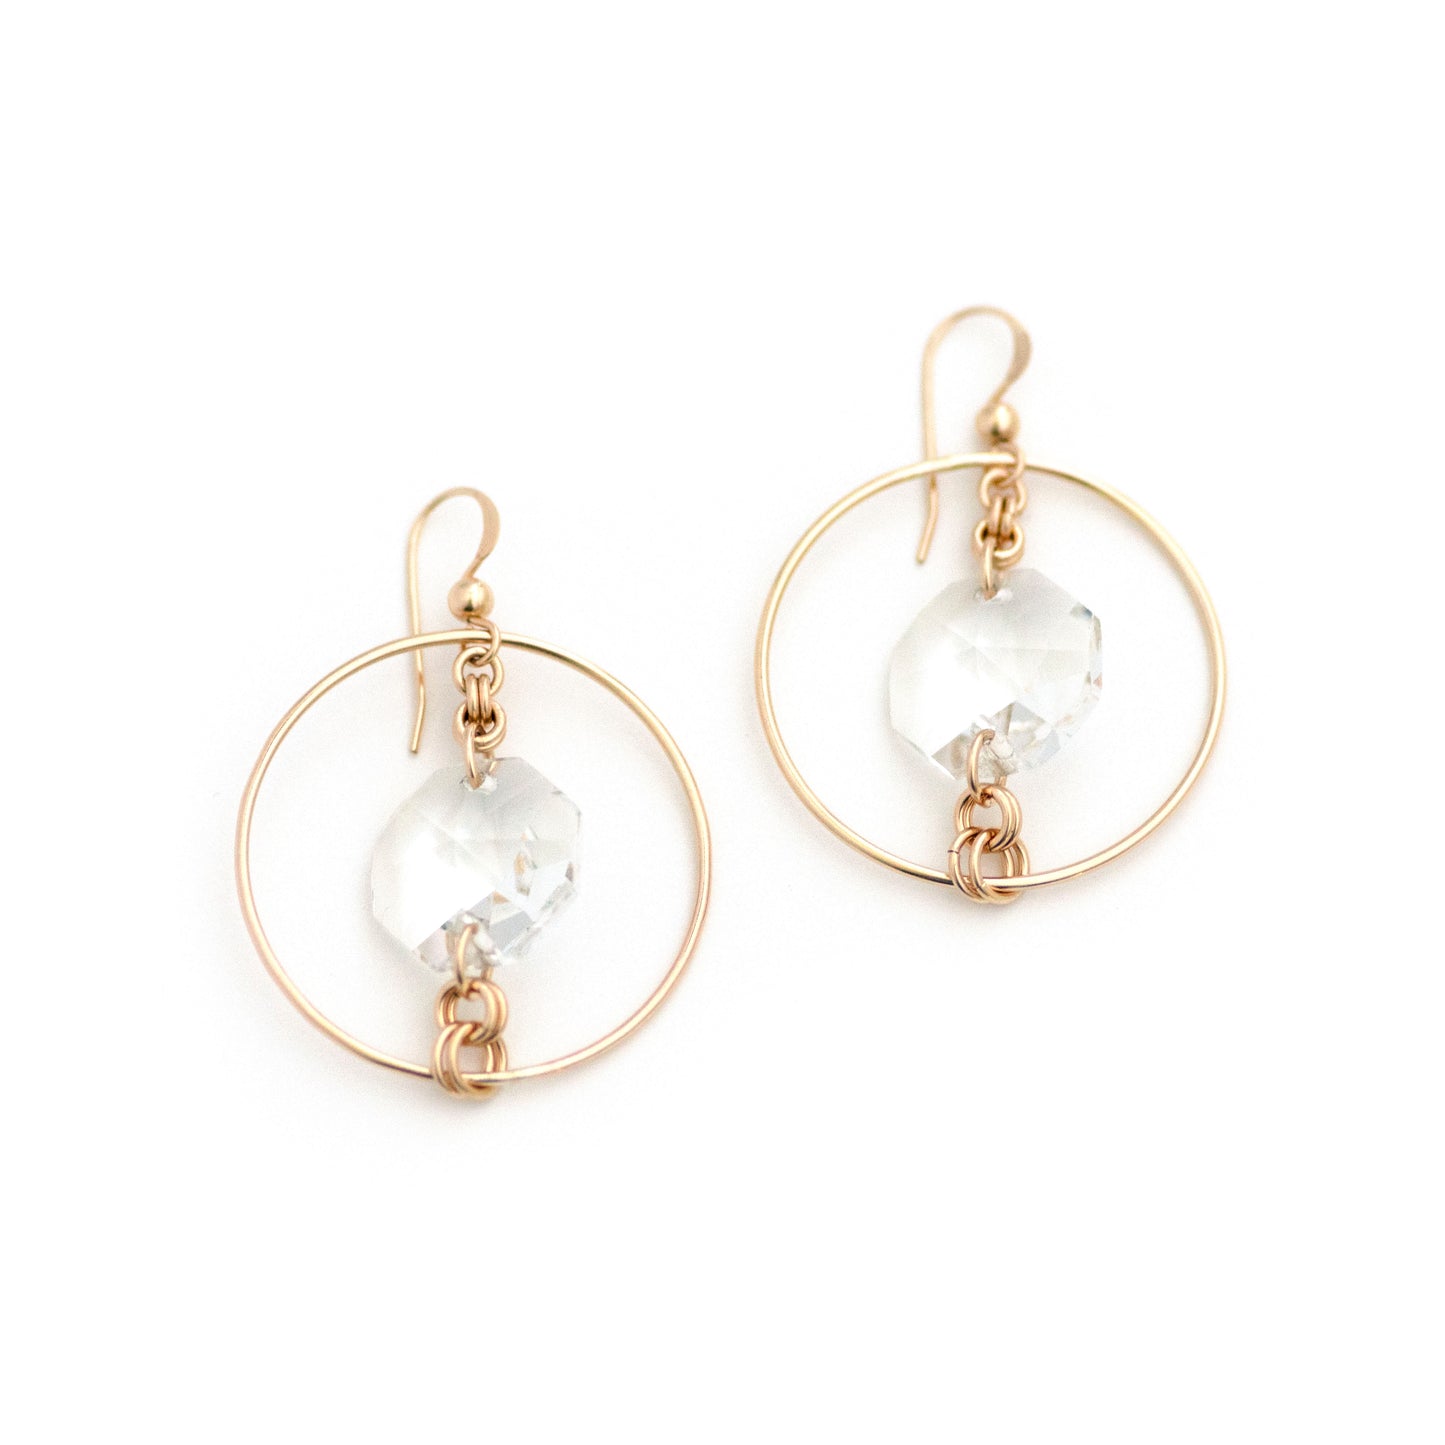 These repurposed vintage earrings are made up of:  Chandelier crystal glass prisms and 14k gold fill.